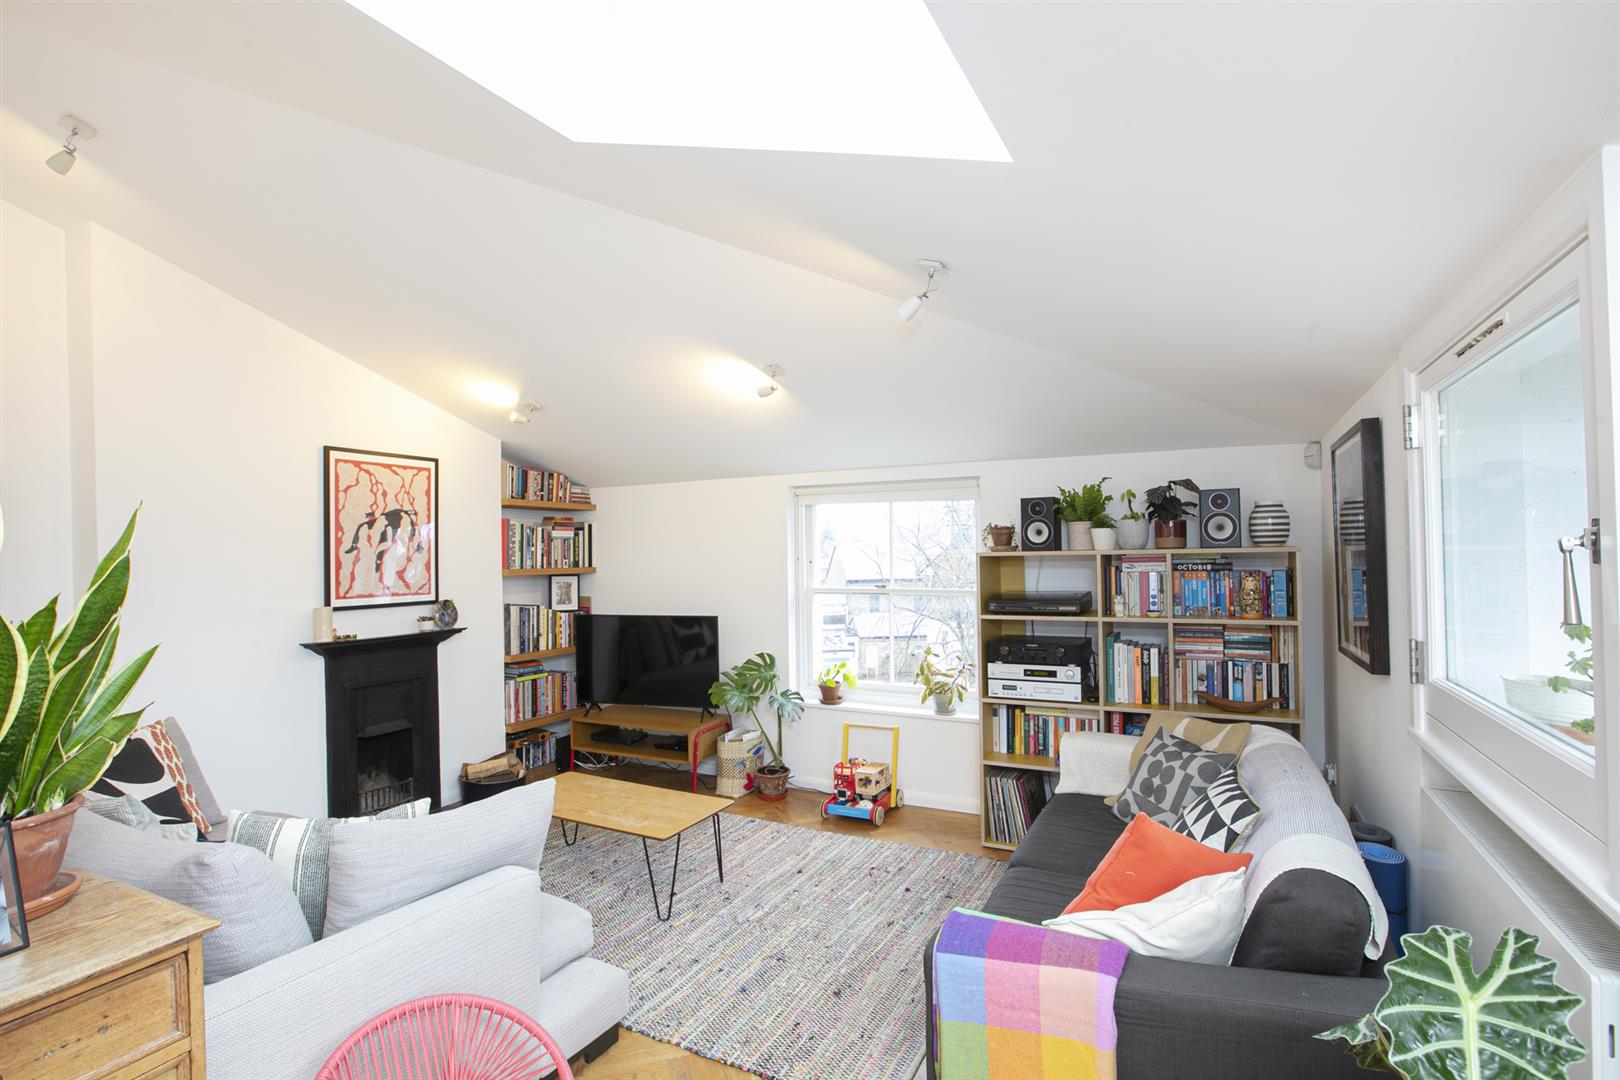 Flat - Conversion For Sale in Holly Grove, Peckham, SE15 893 view6